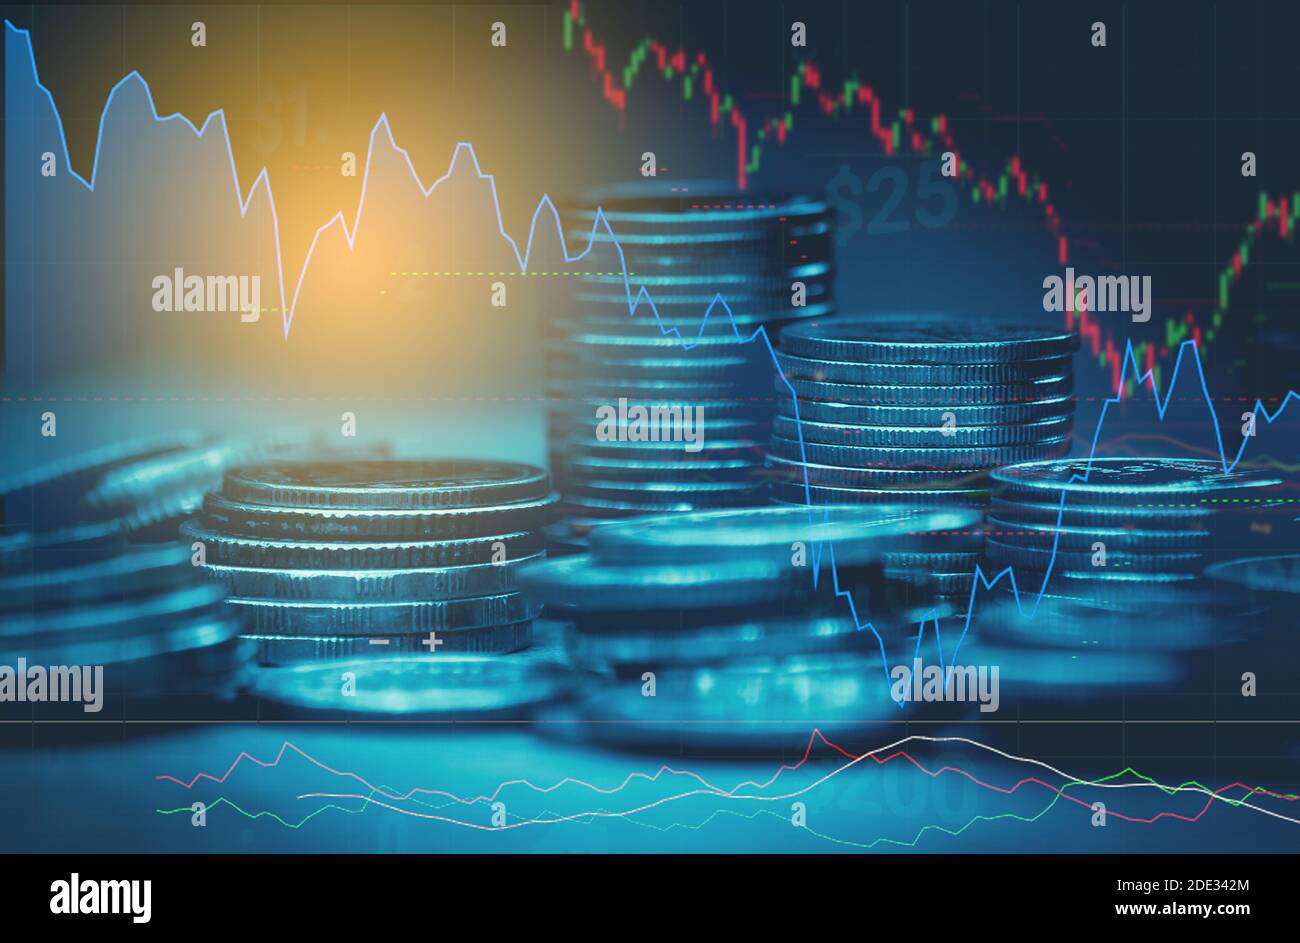 Double exposure of money coin, stock market or forex trading graph and candlestick chart suitable for financial investment concept. Stock Photo